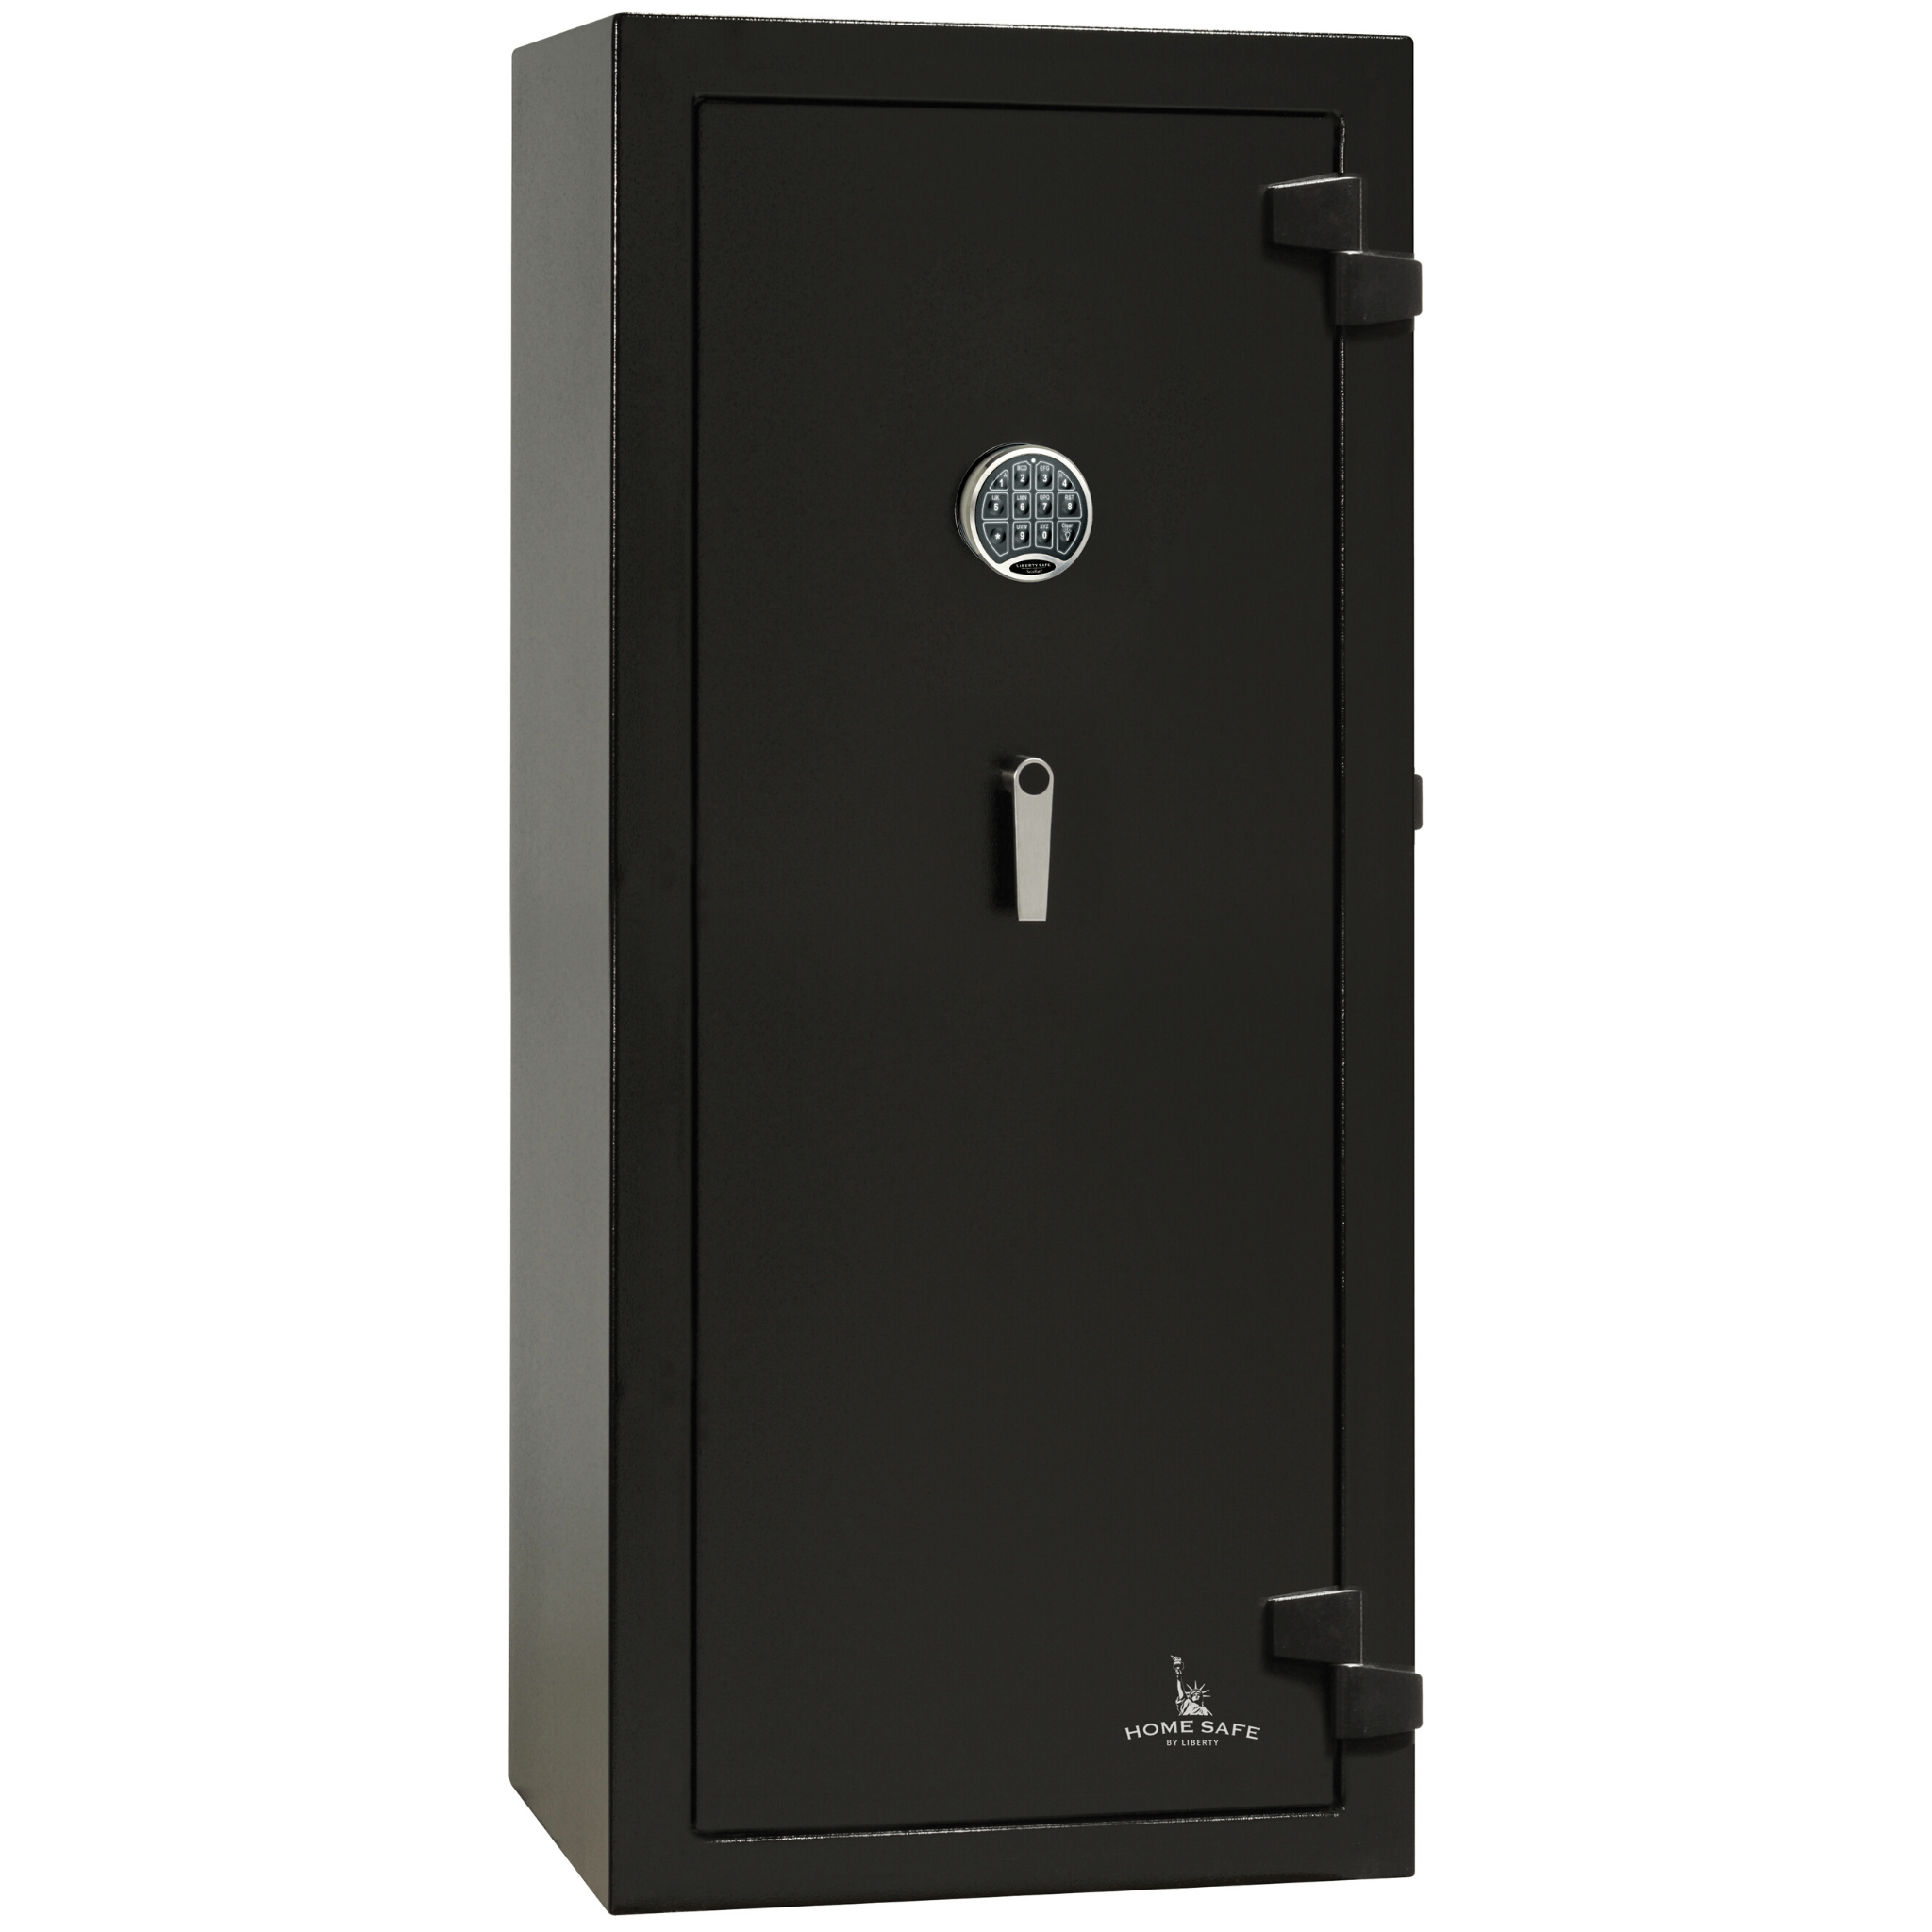 Home Safe | 17 | 60 Minute Fire Protection | Black | Electronic Lock | Dimensions: 59"(H) x 24.25"(W) x 22"(D), photo 1